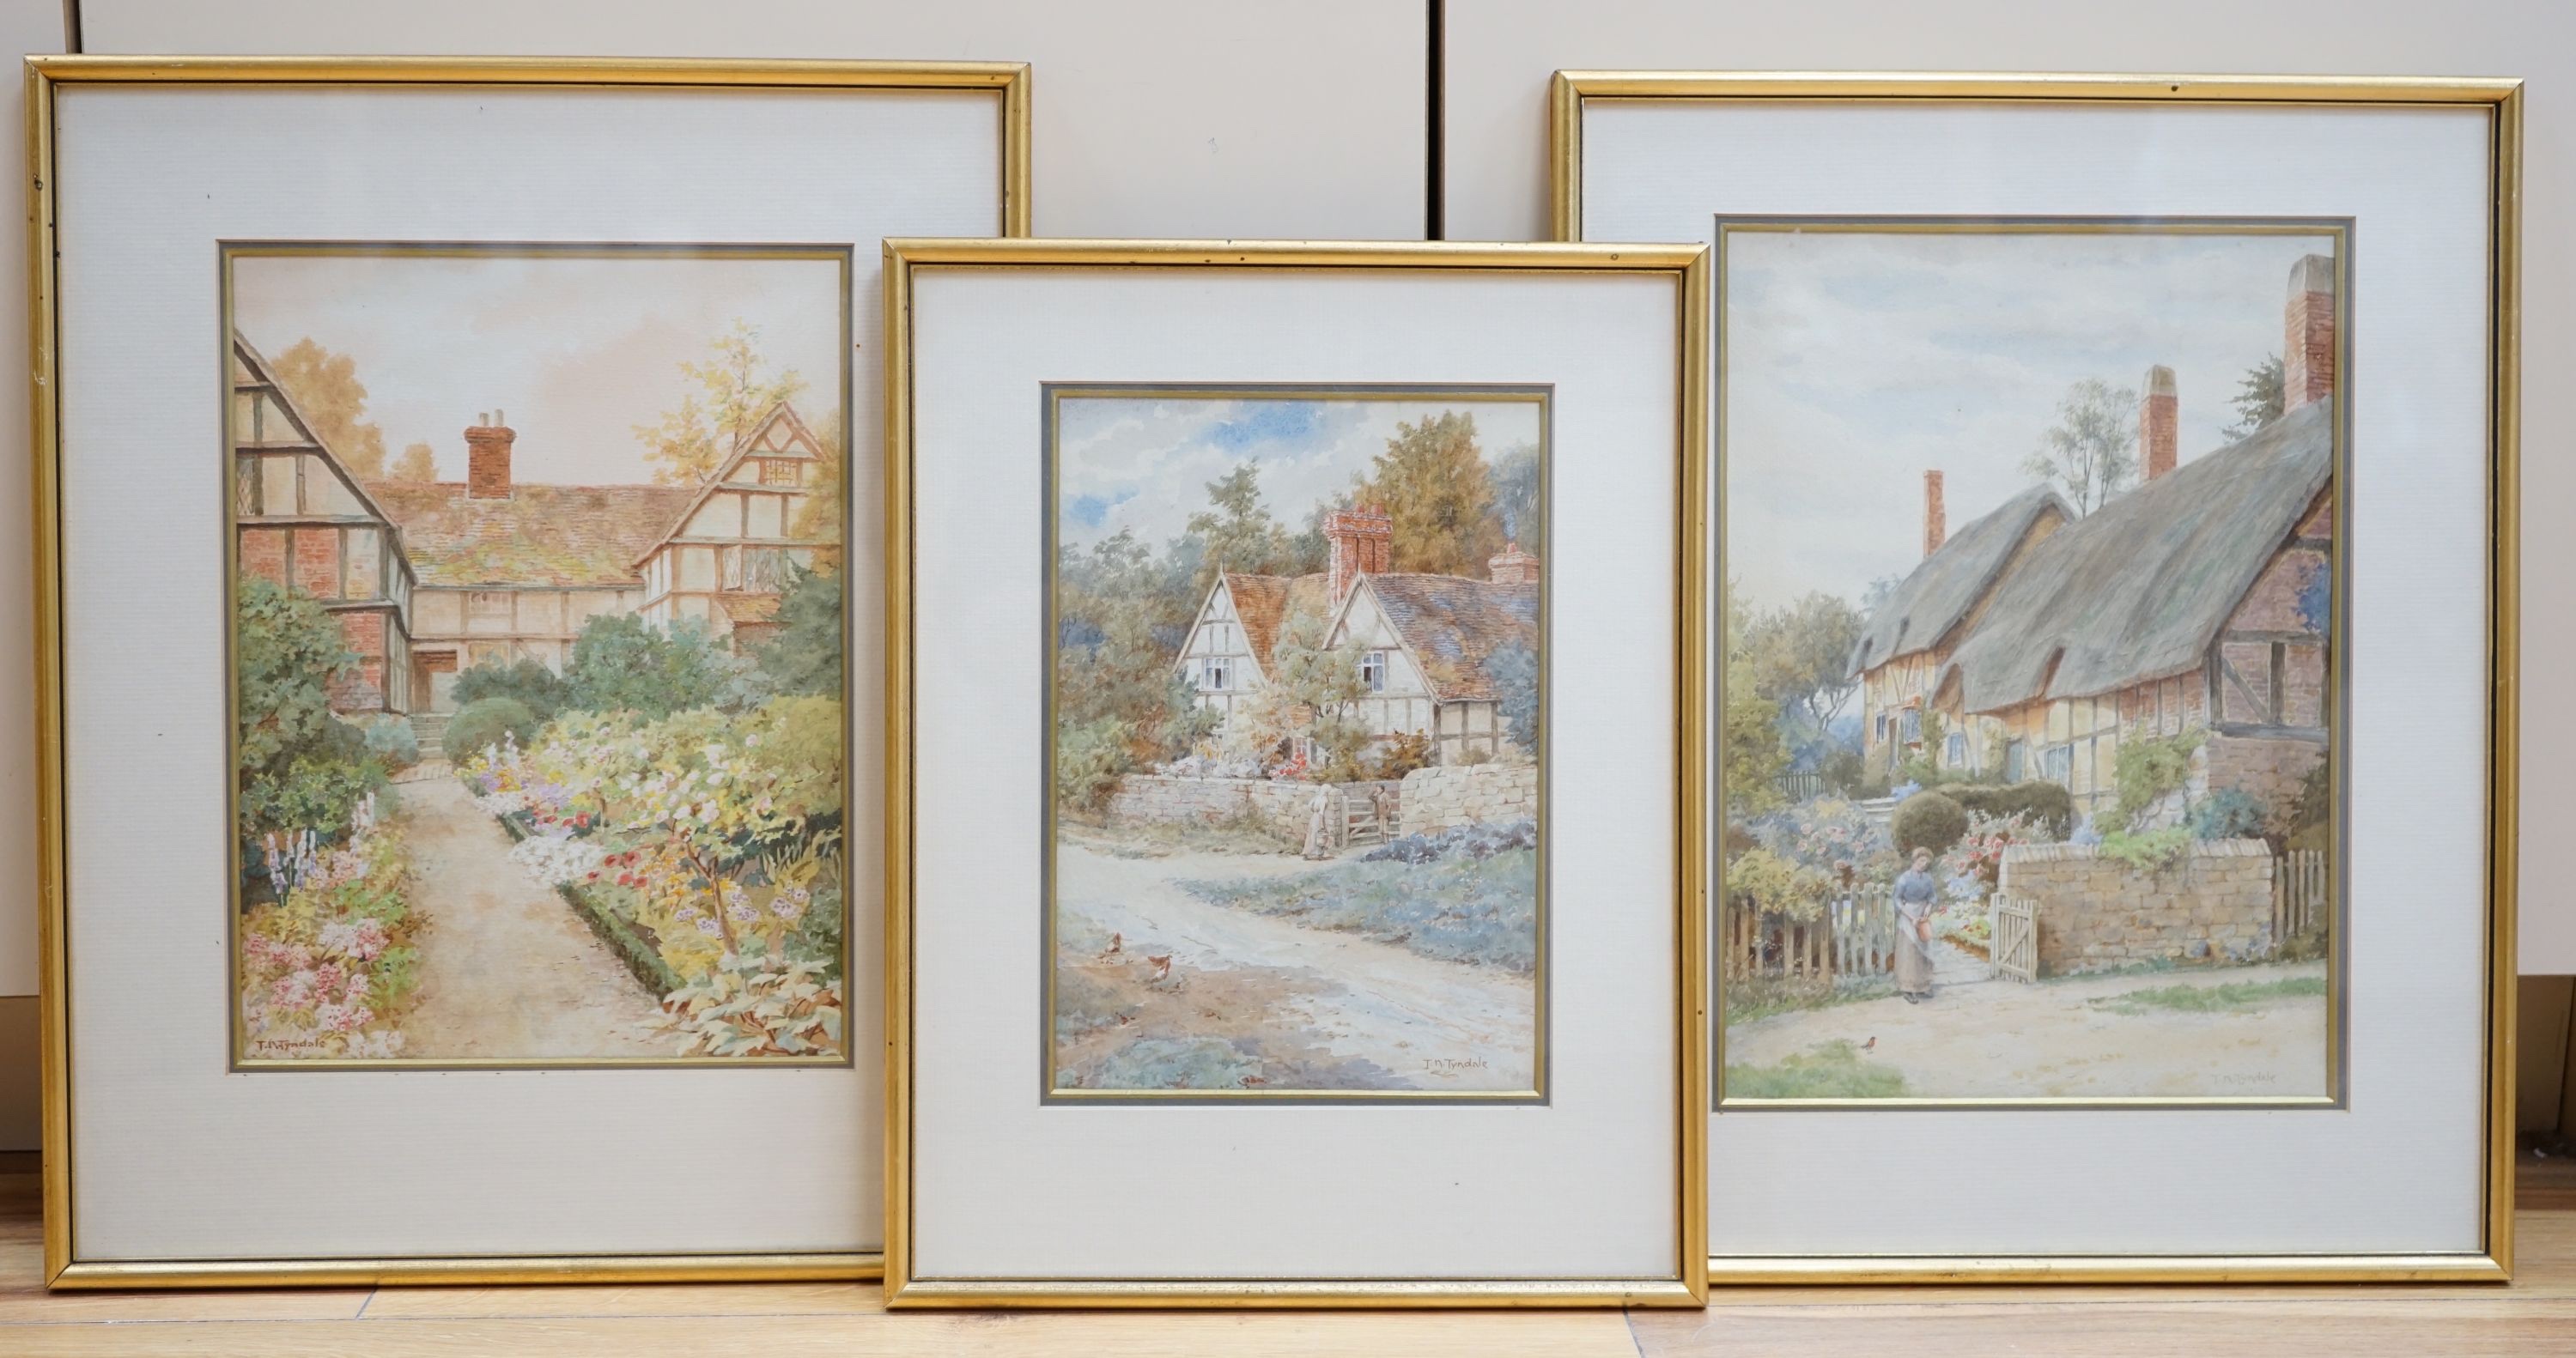 Thomas Nicholson Tyndale (1860-1930), three watercolours, 'Near Stourbridge, Worcestershire', 'Anne Hathaway's Cottage' and 'Astley Town', signed, largest 32 x 23cm